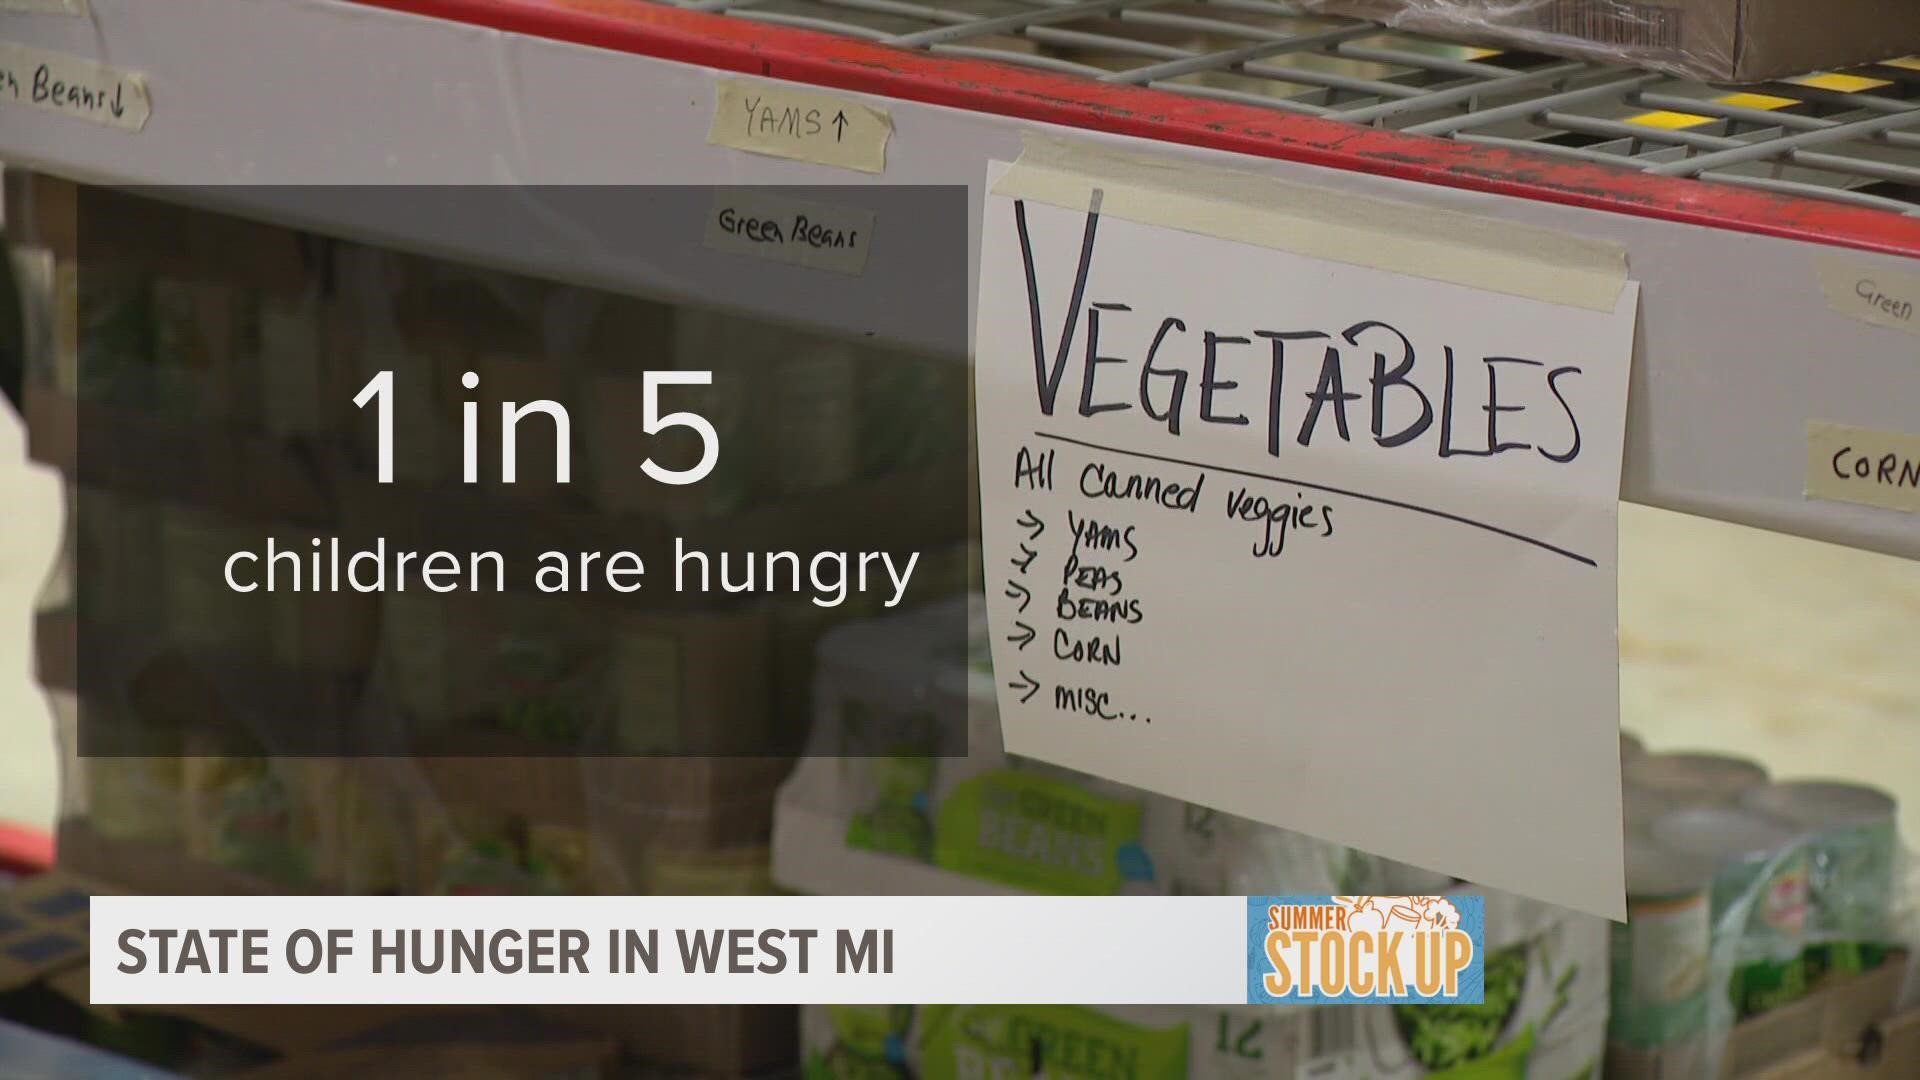 Families tend to go hungrier during the summer, and the Summer StockUp is doing all they can to help.